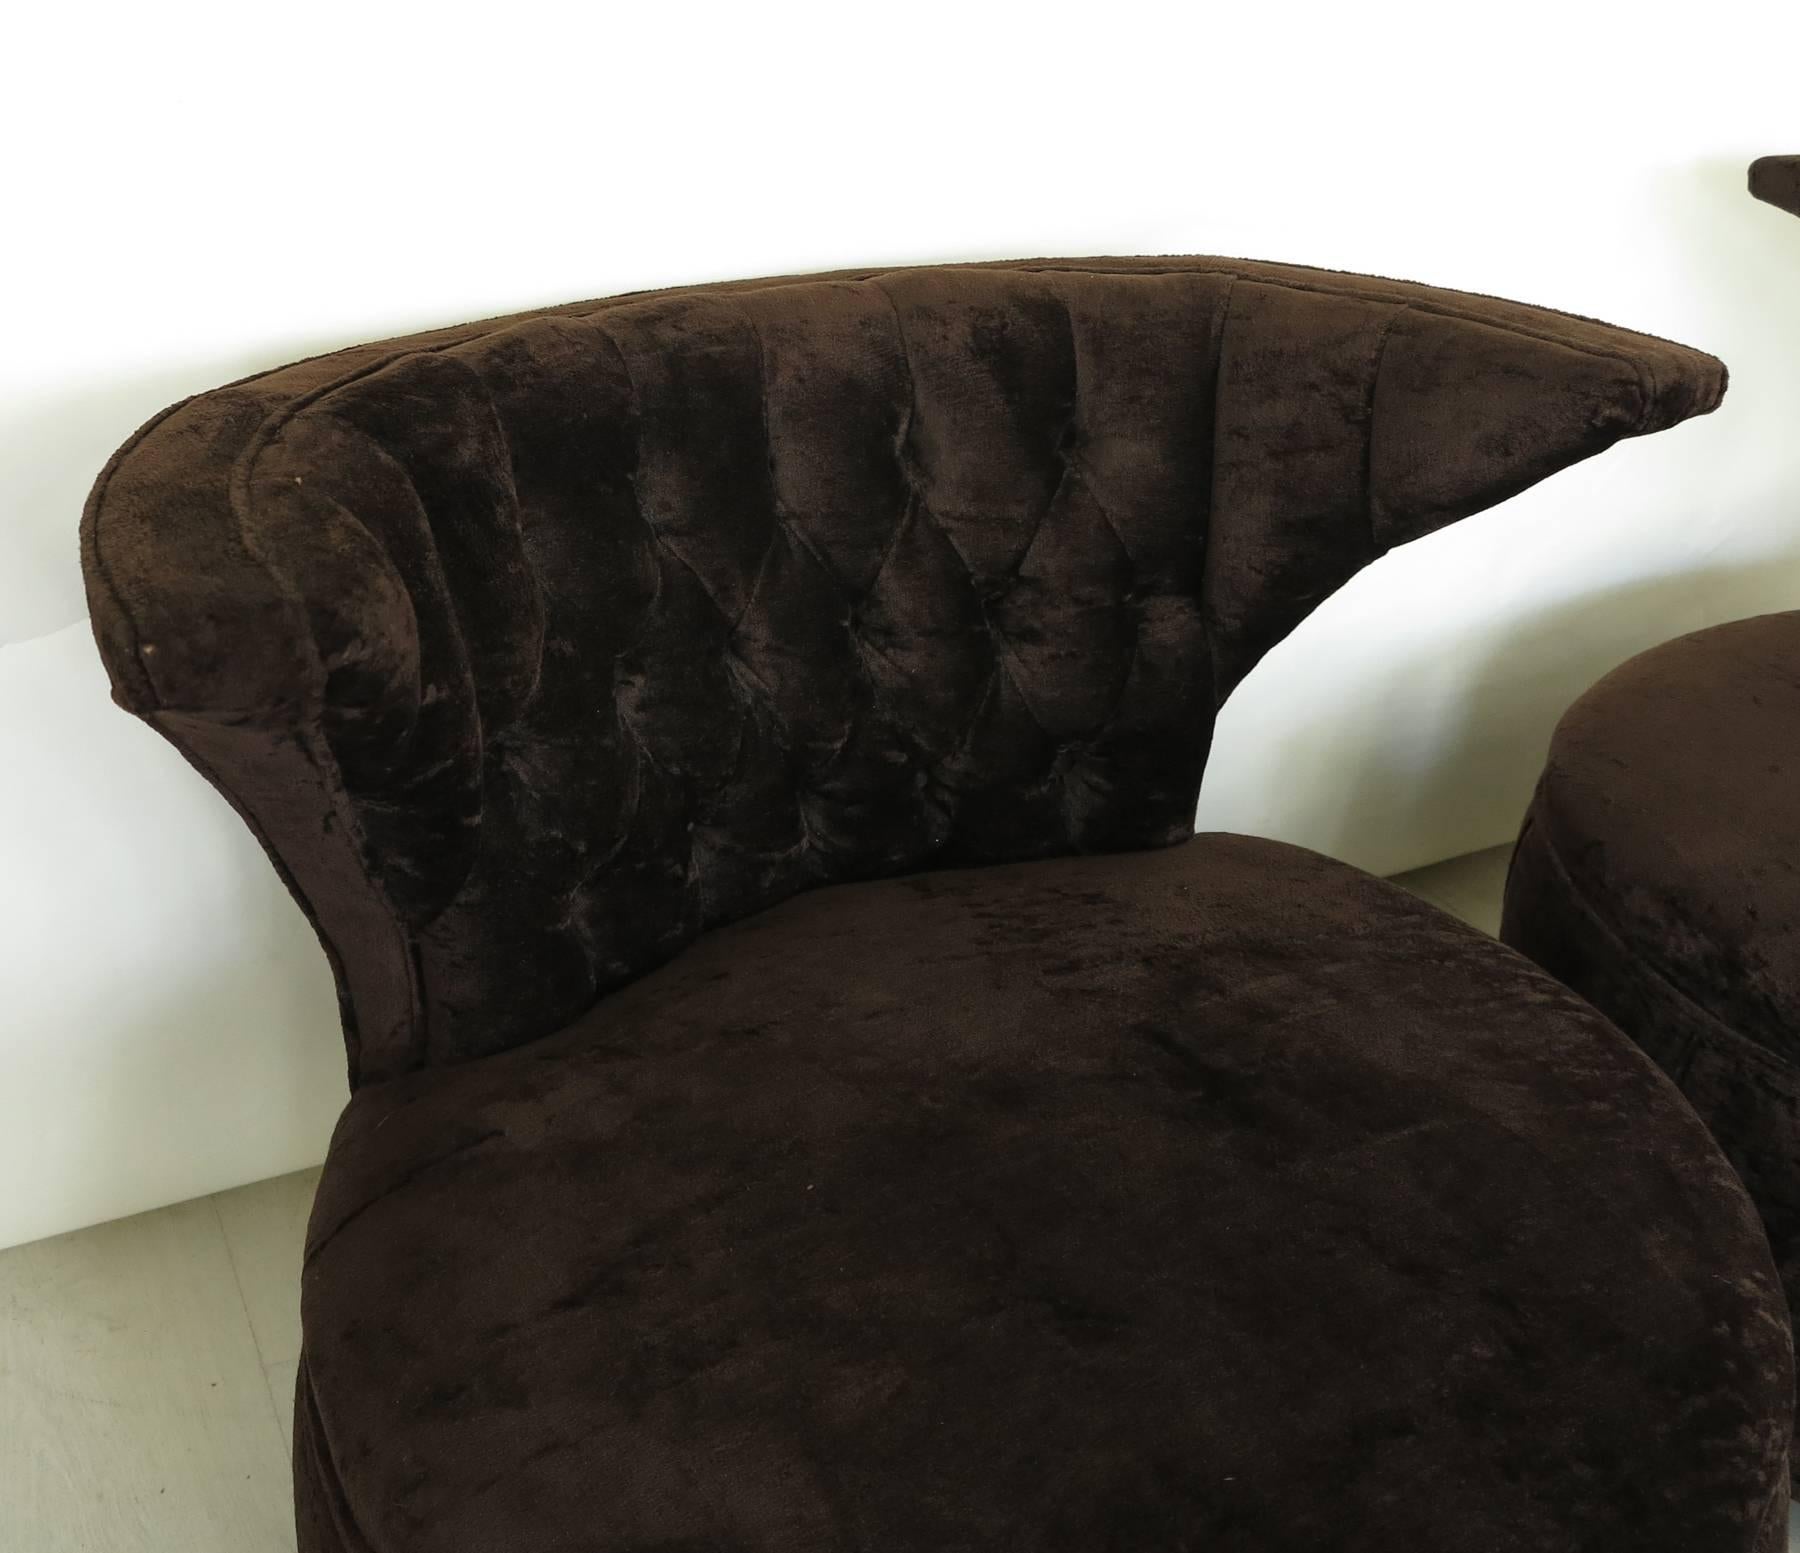 Pair of barrel lounge chairs tufted backs with wrap around wings. Original chocolate colored crushed velvet upholstery. Overall in very good condition.